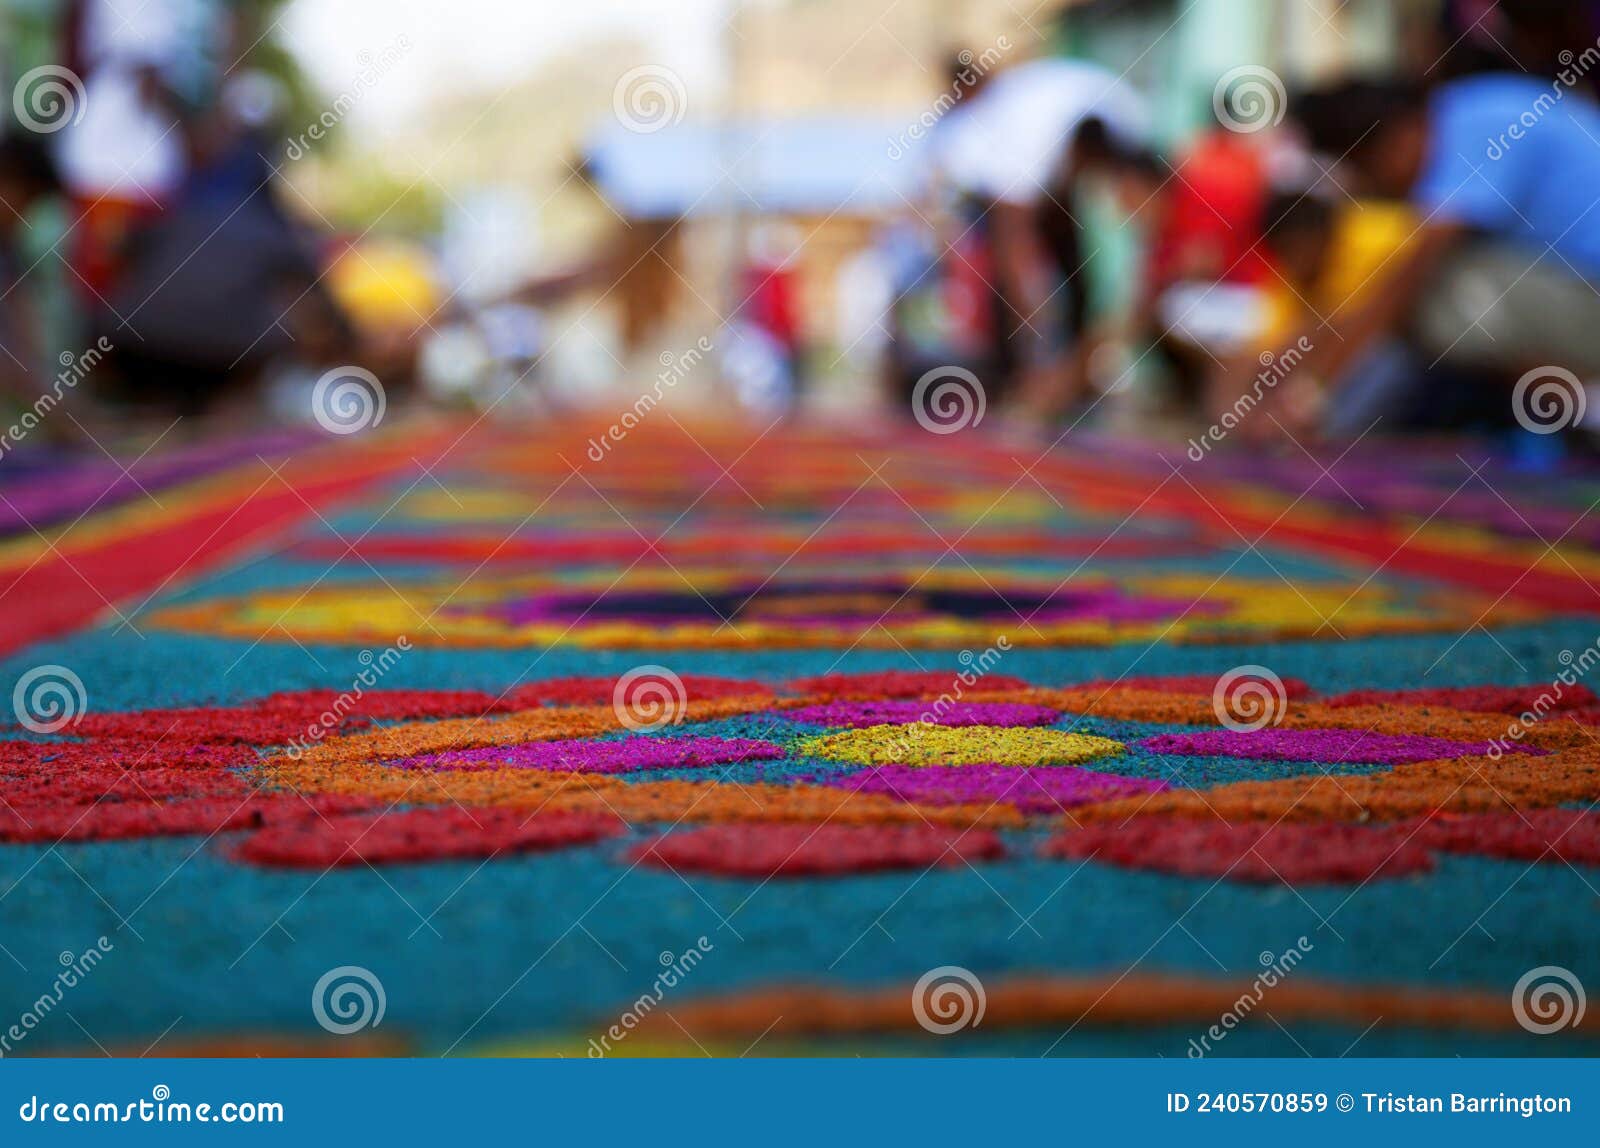 street screen of locals producing alfombra, sawdust carpets with colorful s for semana santa, easter on the streets of lake